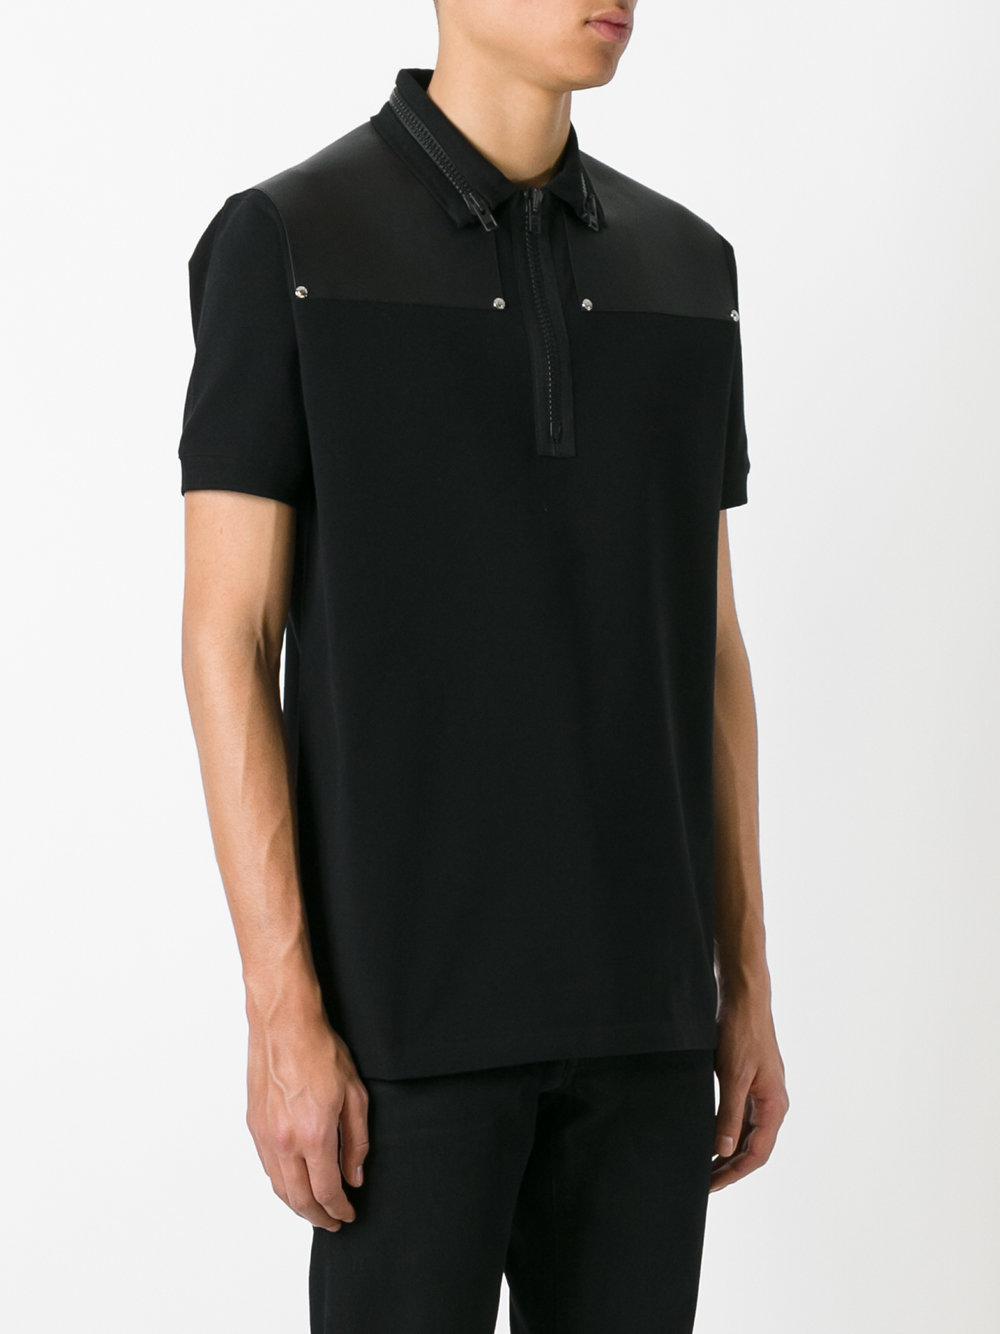 Givenchy Cotton Zip Collar Polo Shirt in Black for Men - Lyst